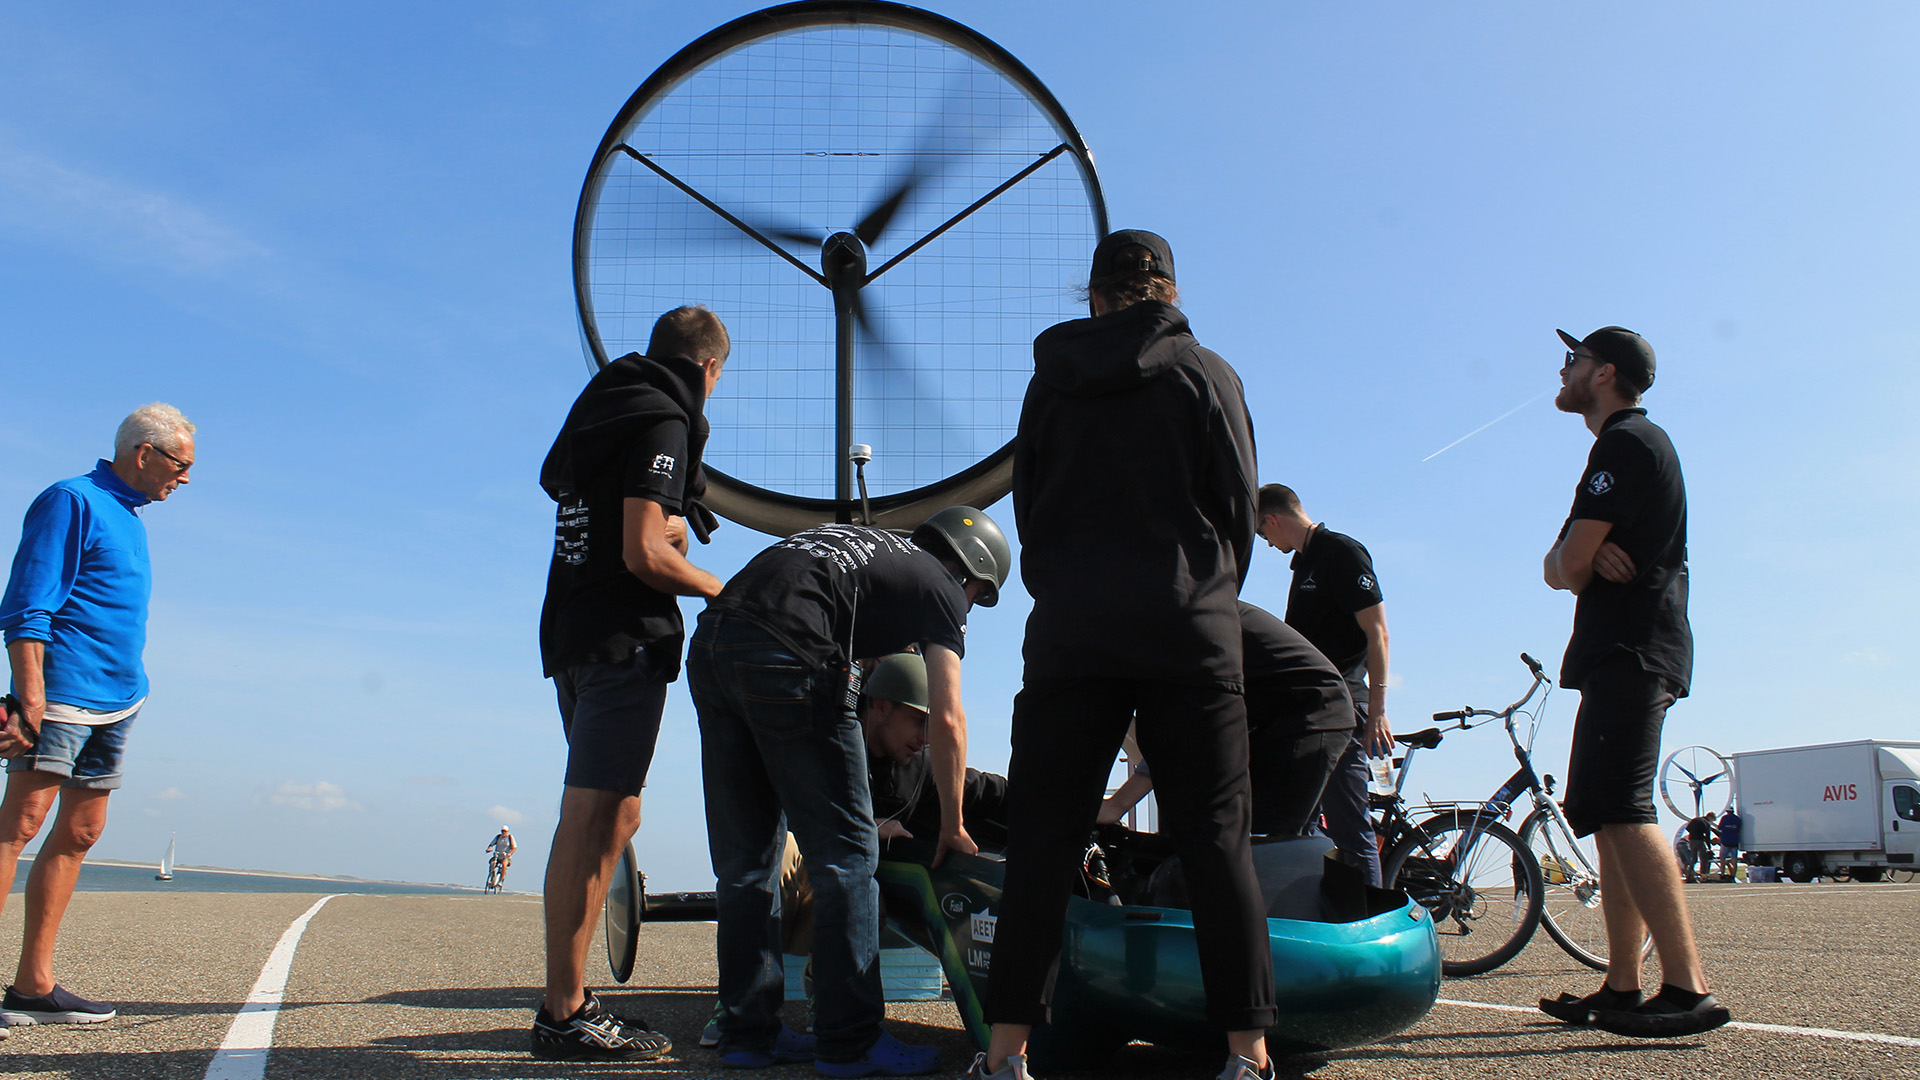 Team Chinook tests their wind-powered car